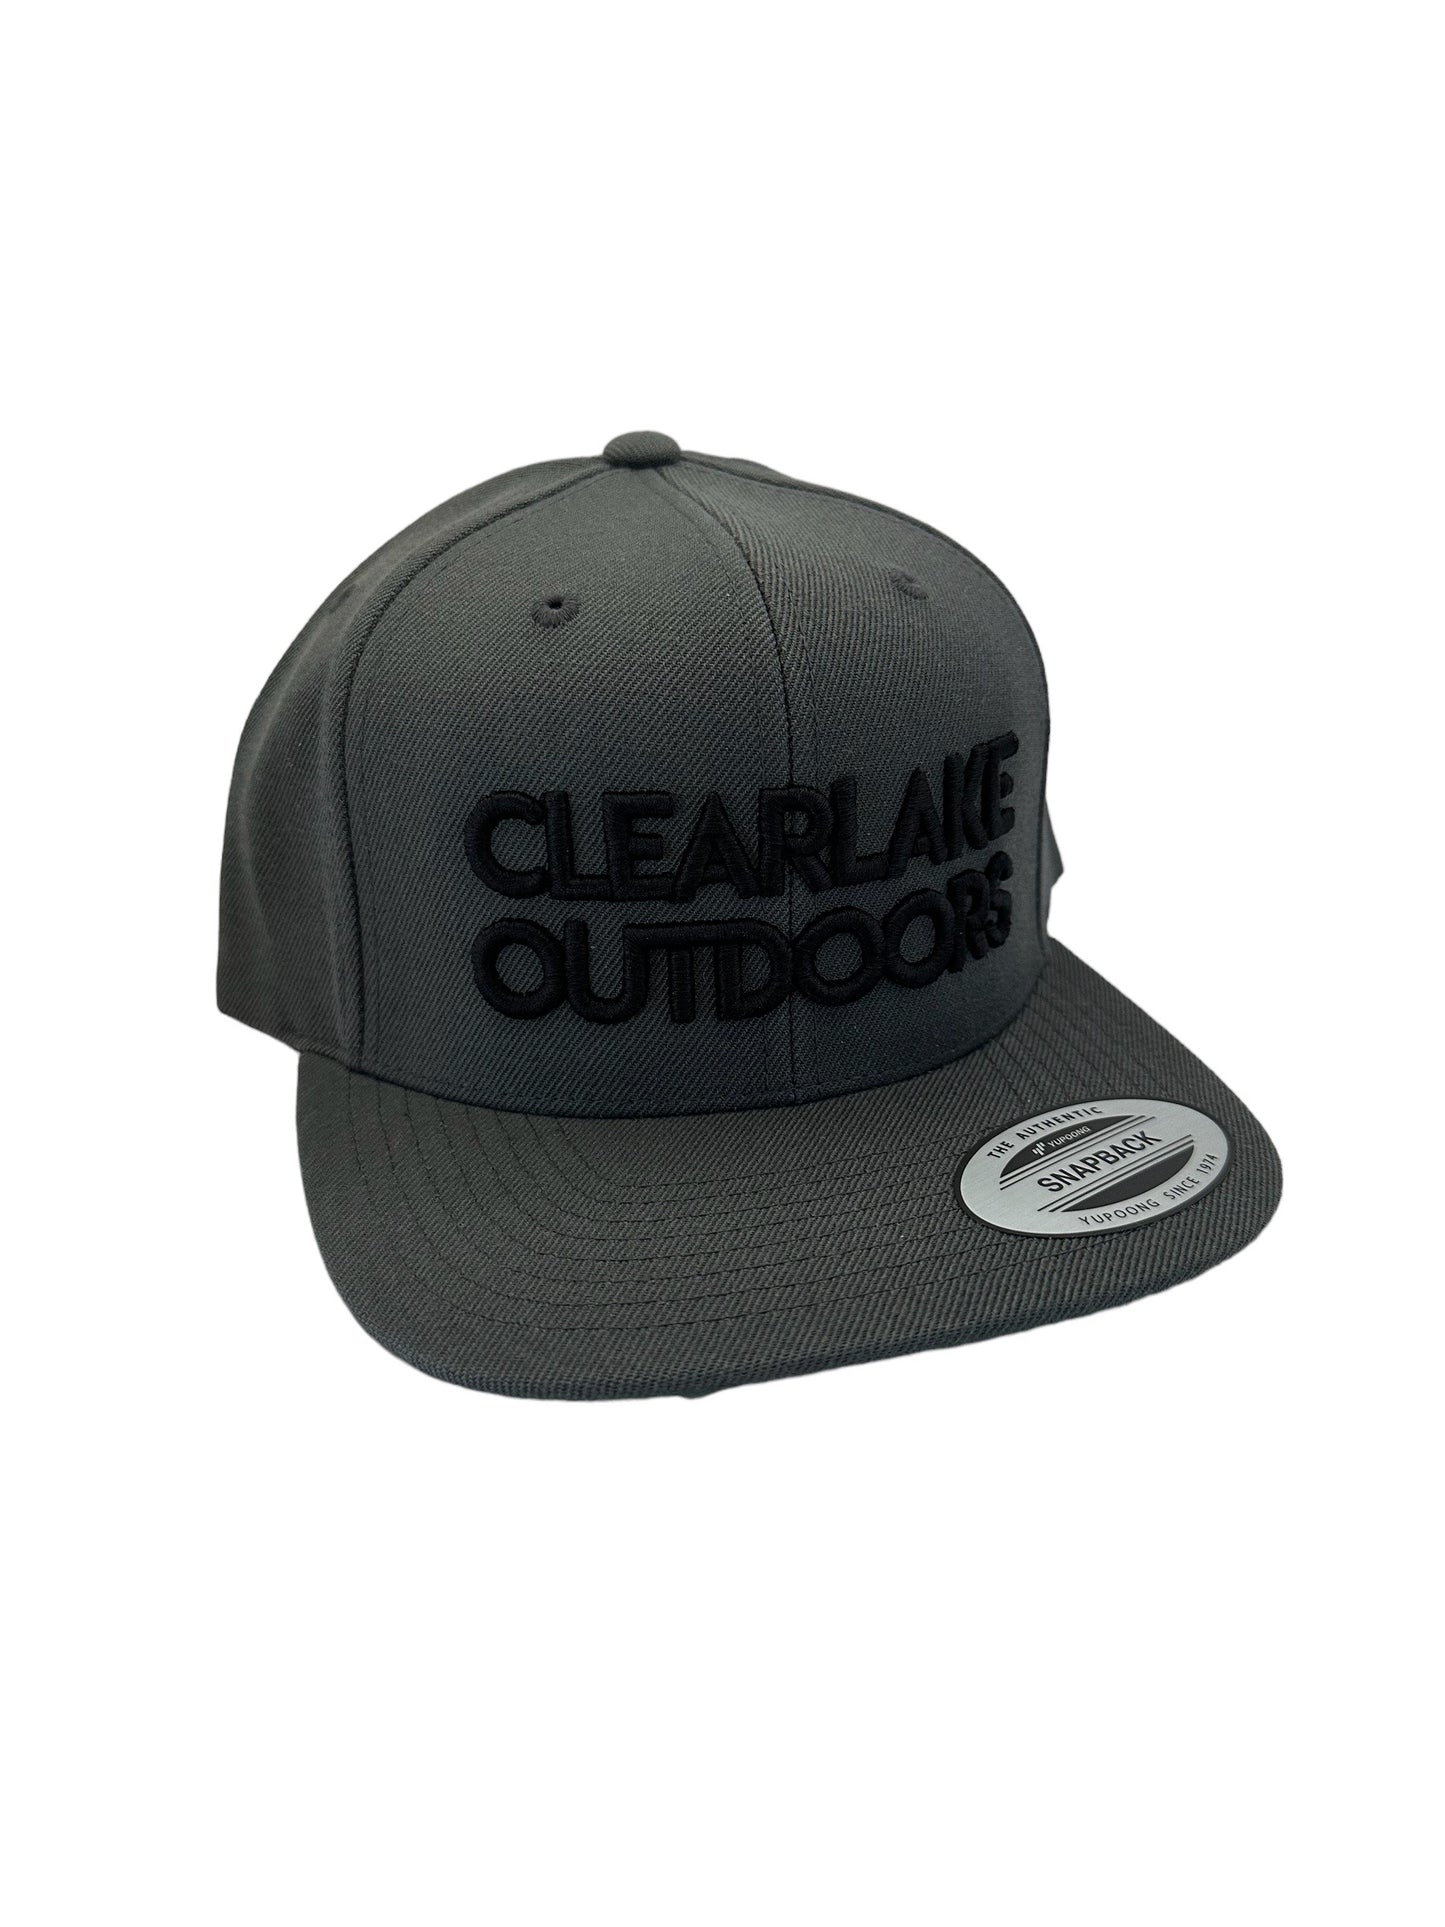 Clearlake Outdoors Logo Hats